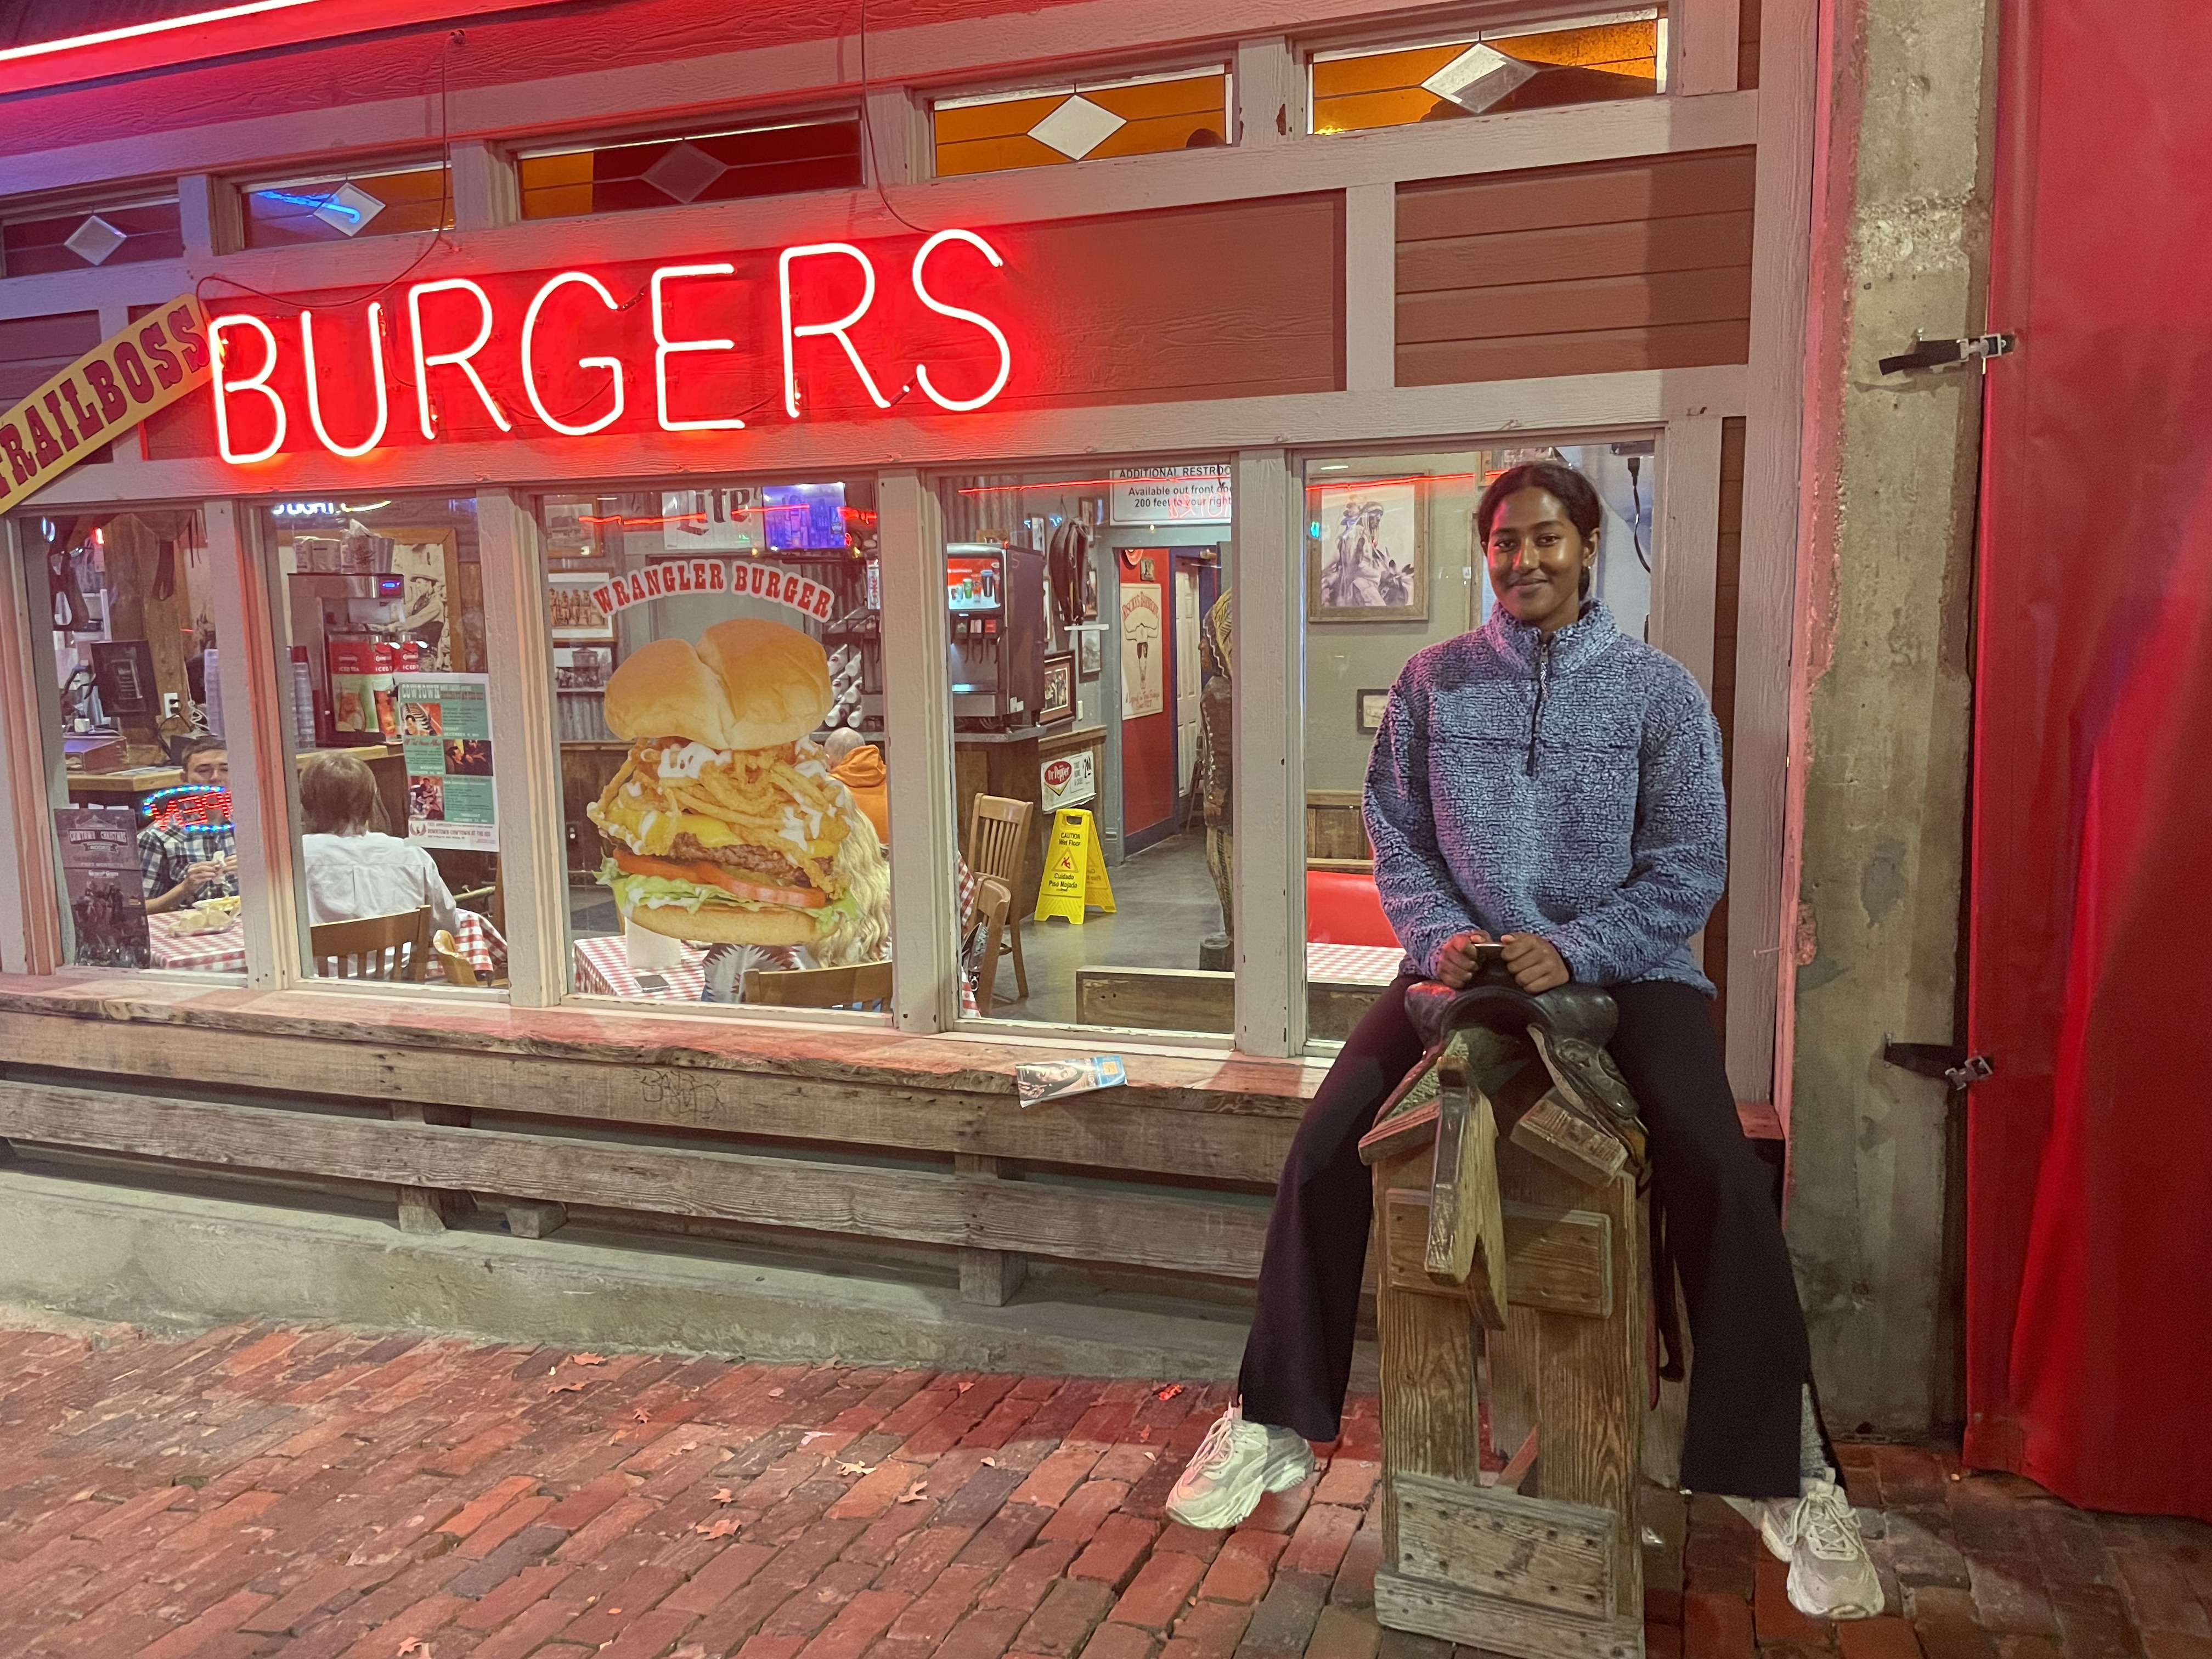 Female sitting on a saddle hoisted on a wooden structure with a "burgers" sign on her right side (left side of image).